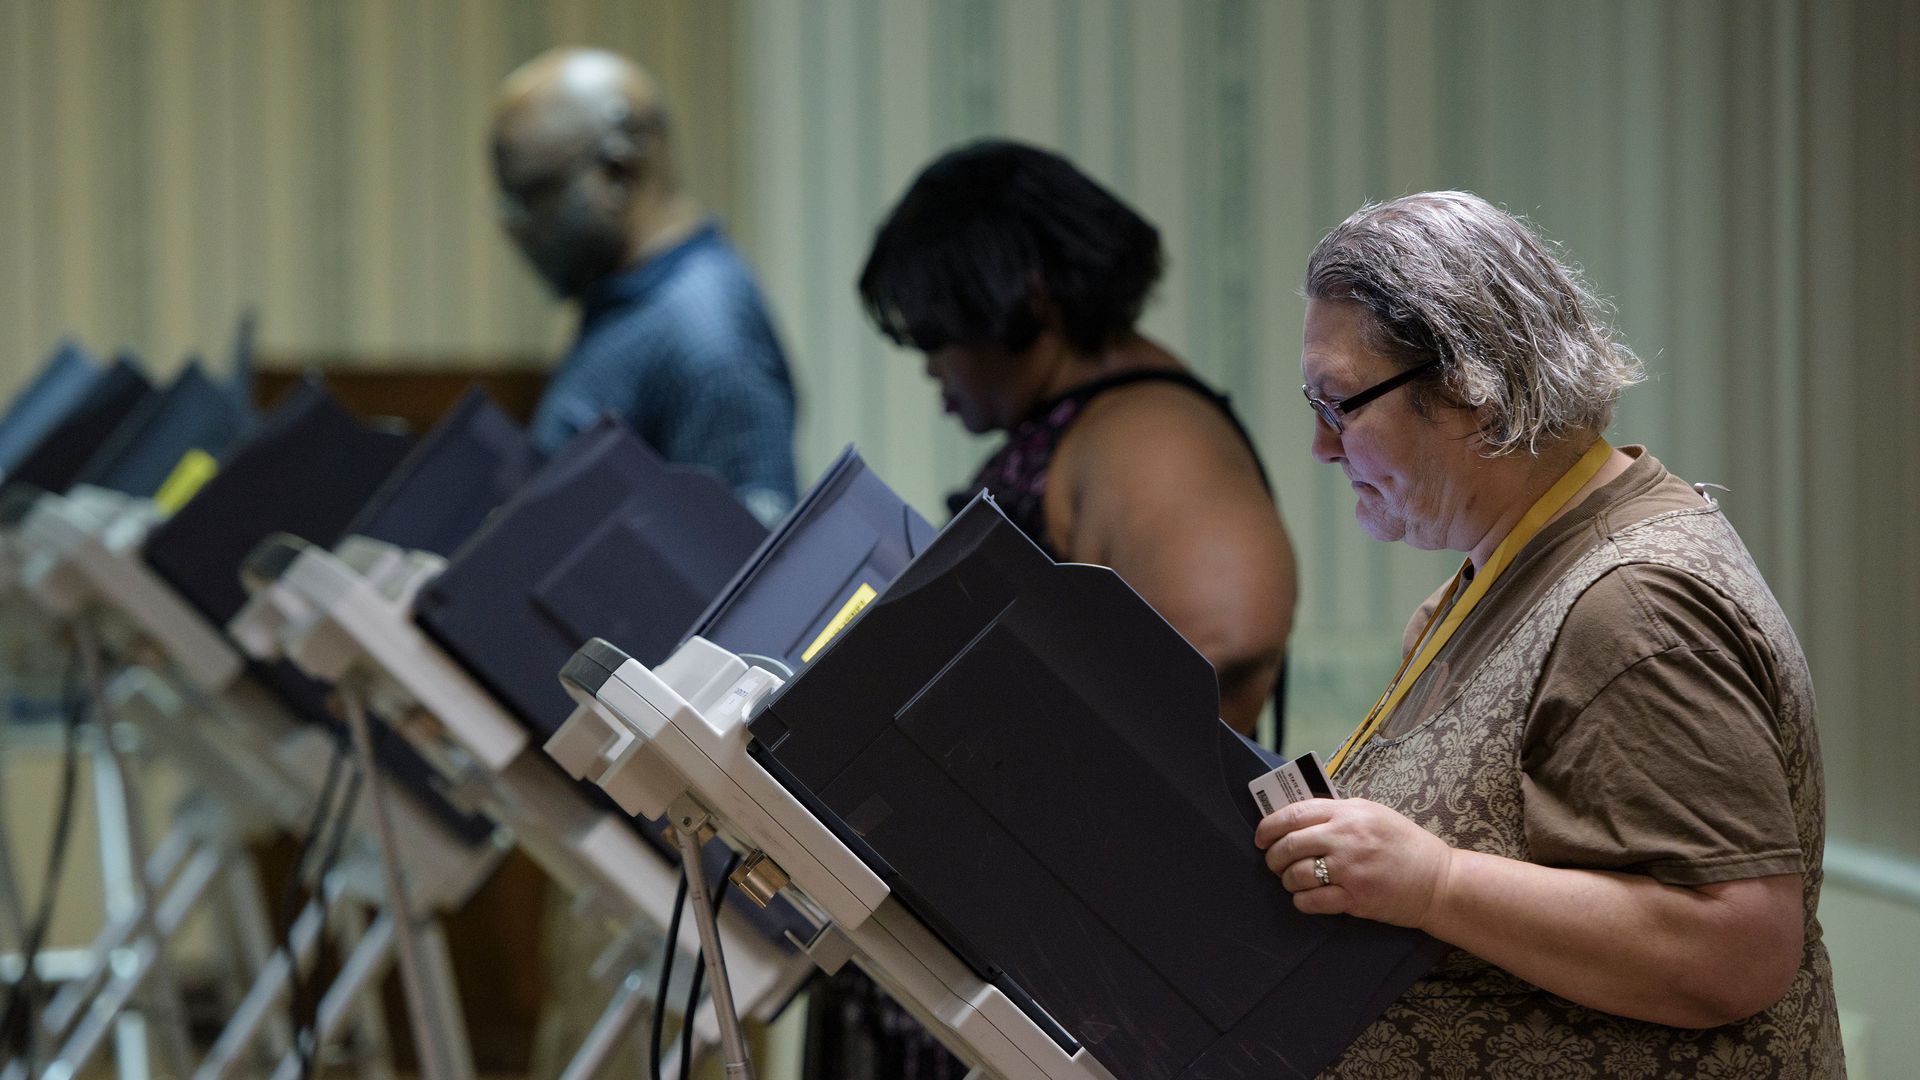 Voters at voting machines